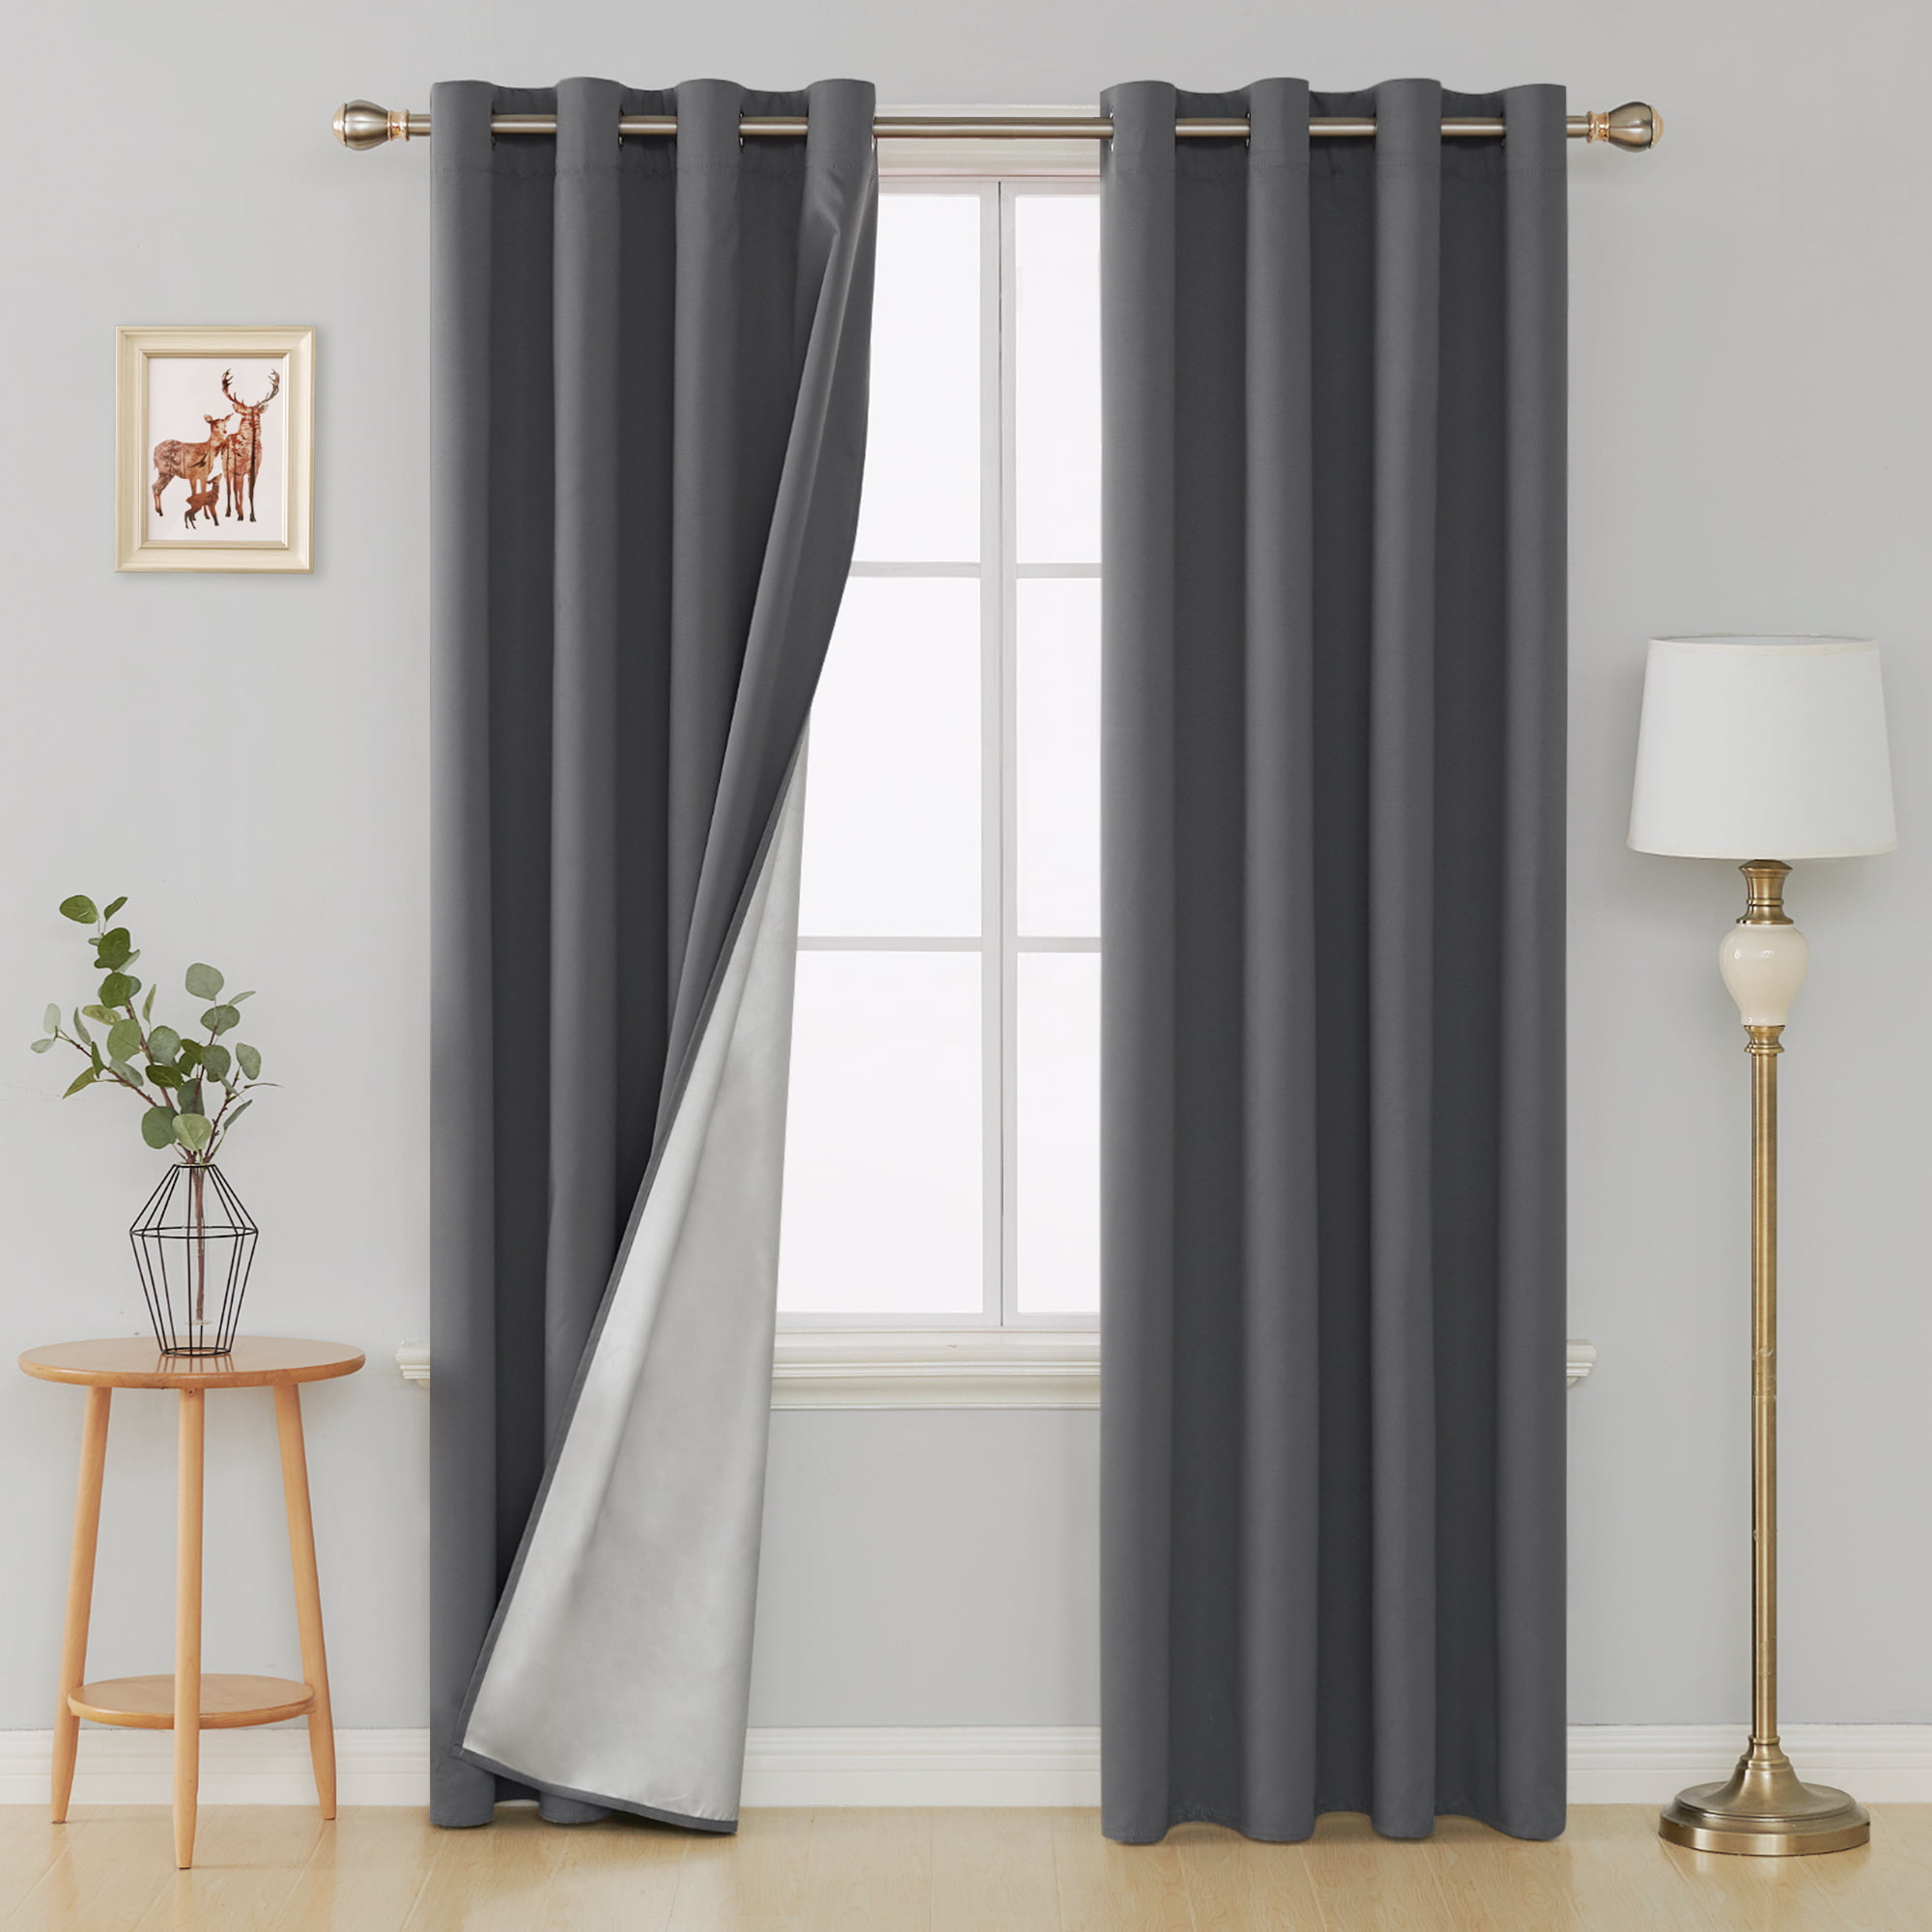 Deconovo Thermal Insulated Blackout Curtains Noise Reducing Home Office Panel Drapes with Silver Coating for French Doors 52 x 63 Inch Greyish White 2 Panels